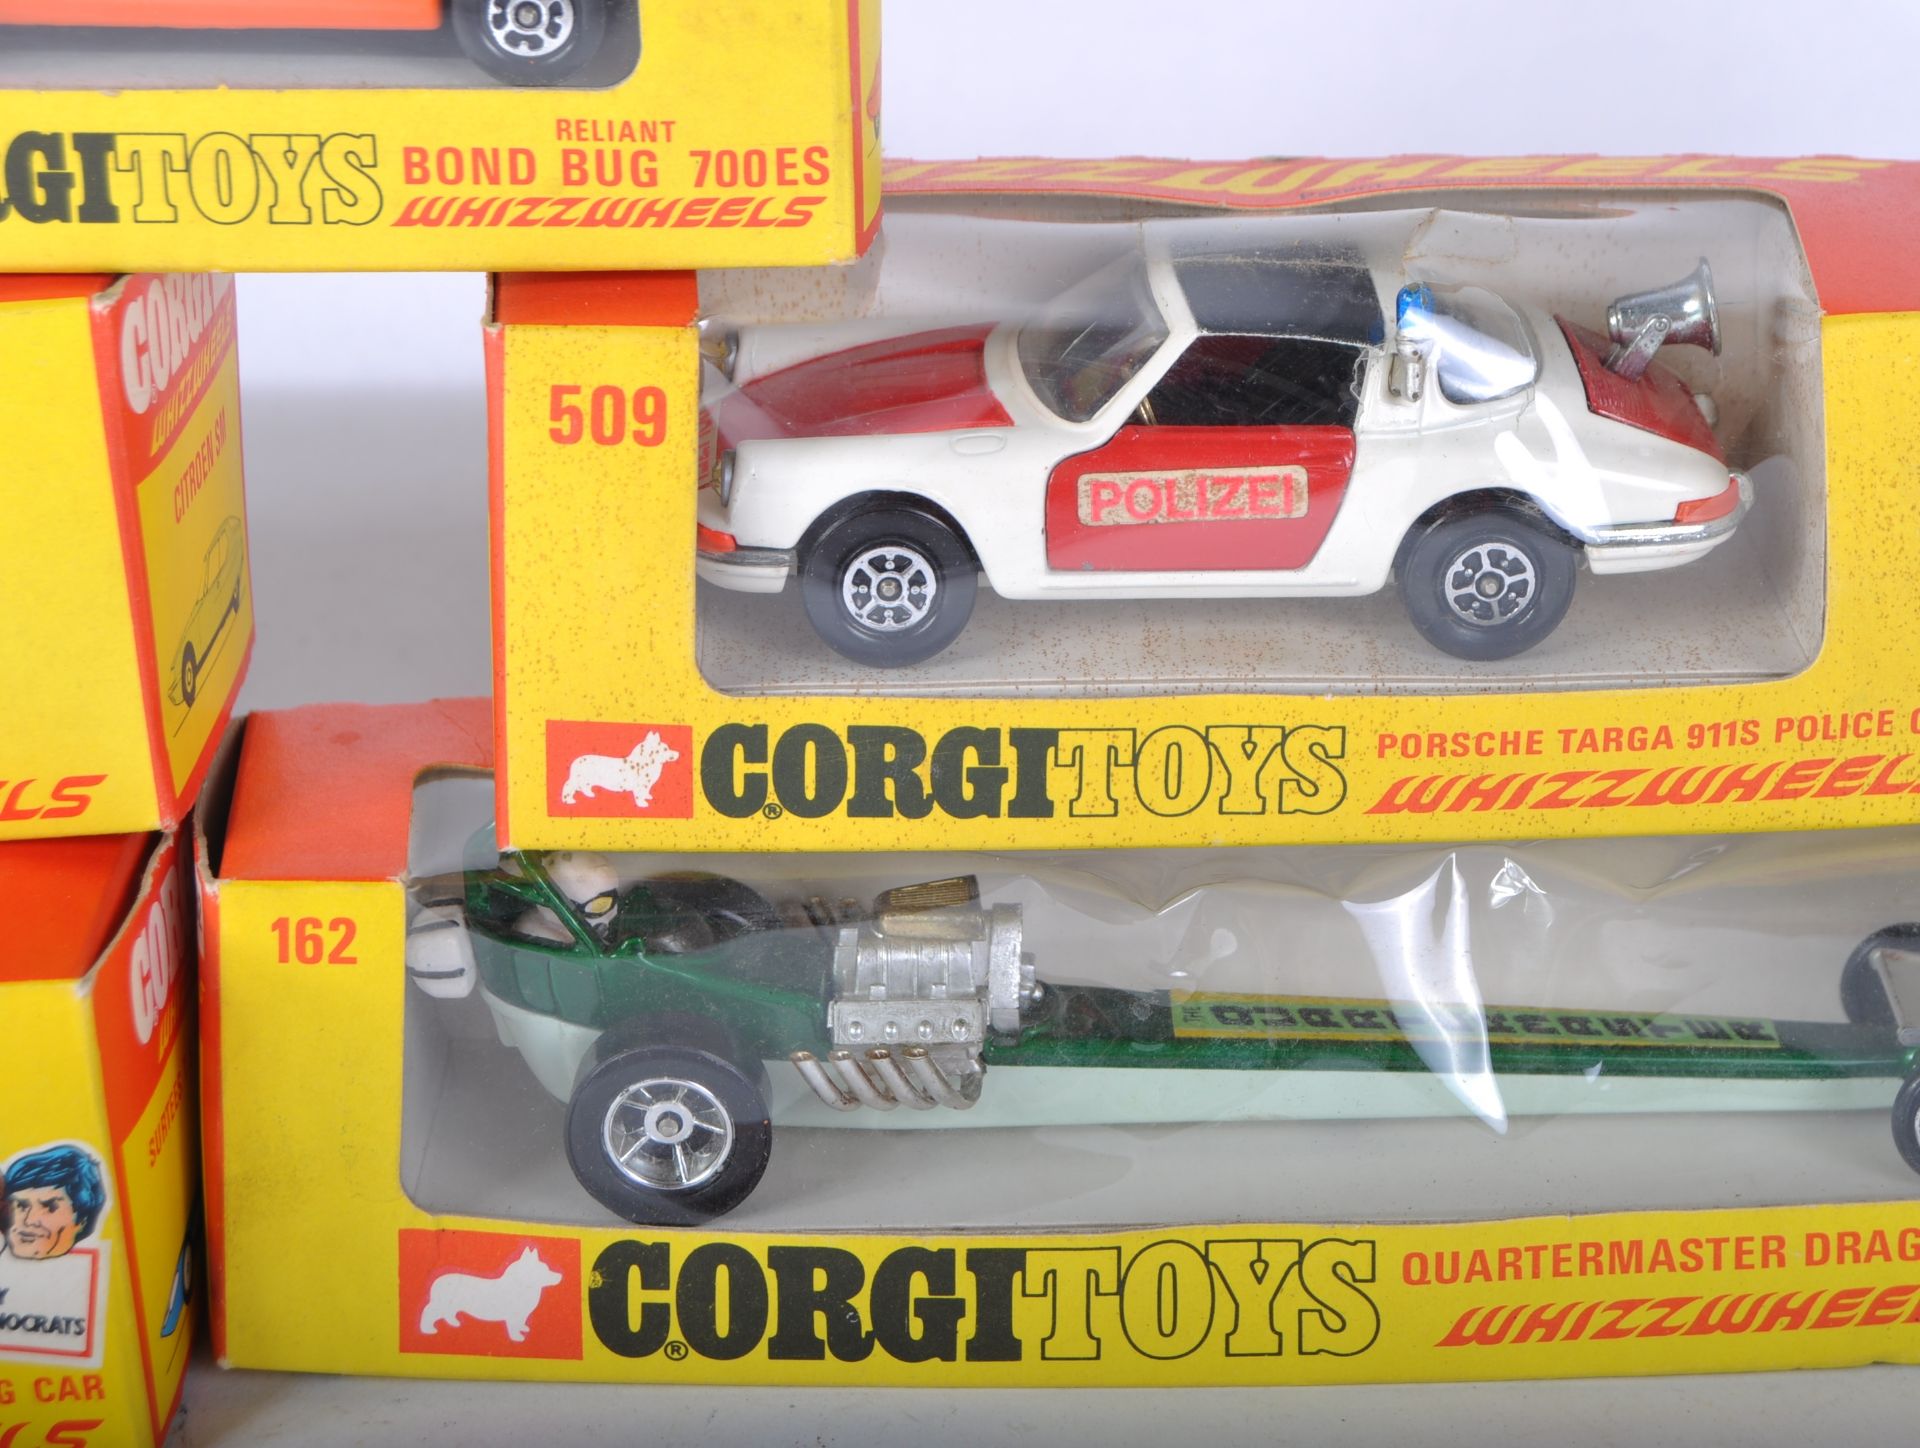 COLLECTION OF VINTAGE CORGI TOYS WHIZZWHEELS DIECAST MODELS - Image 4 of 4